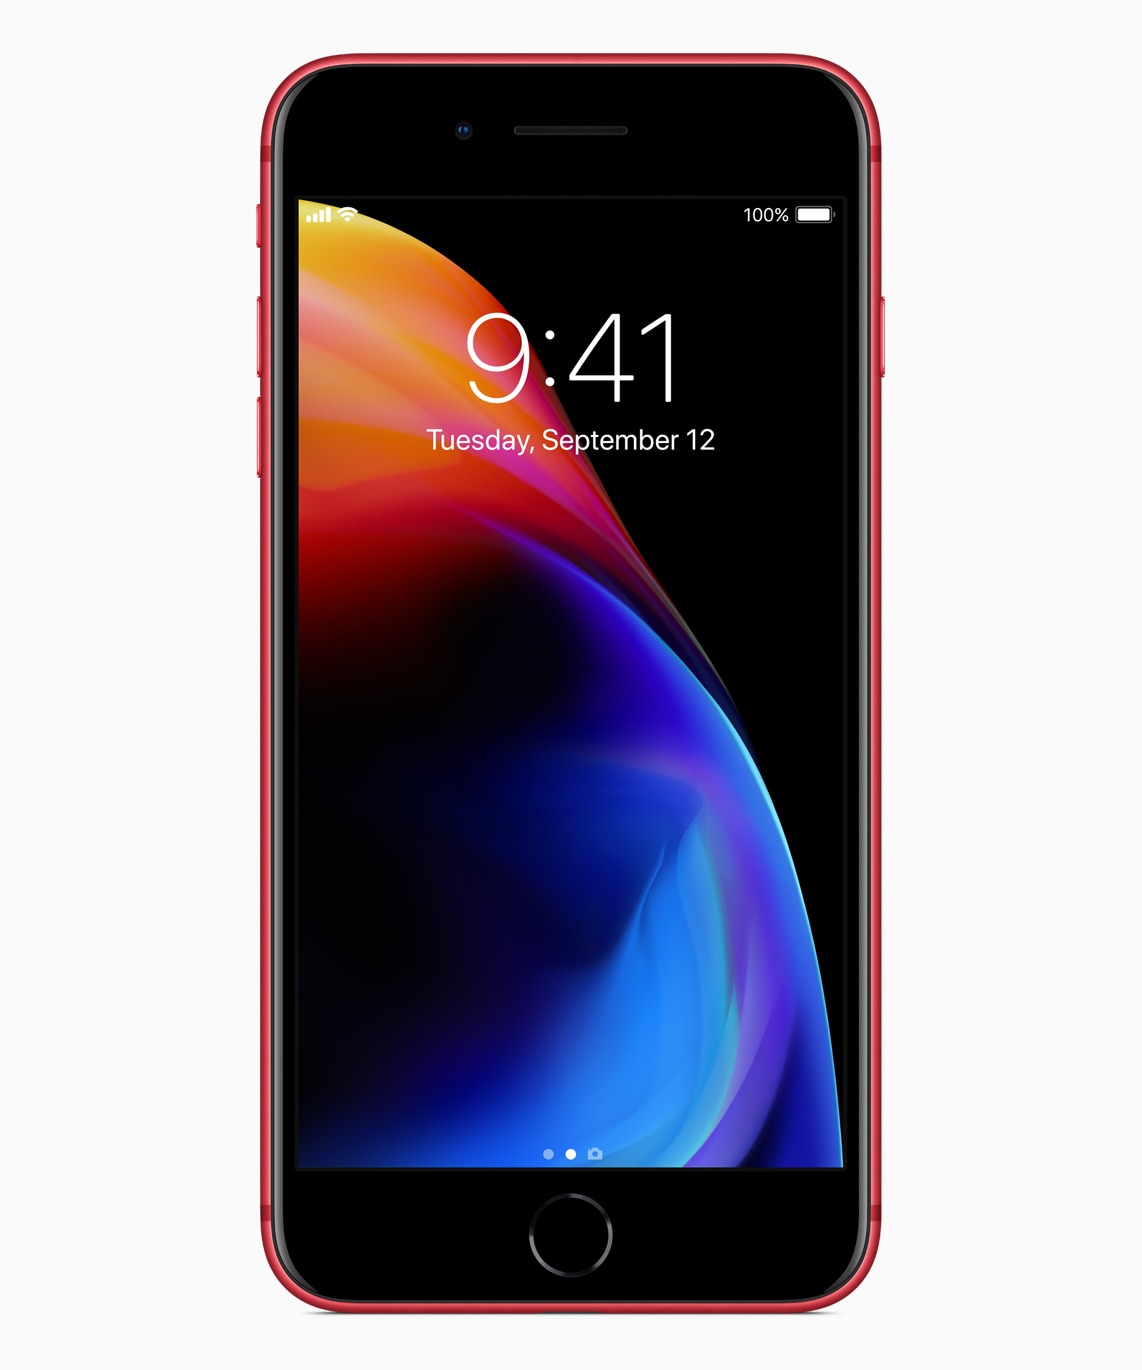 Did you like the wallpaper that appears on the iPhone 8 (PRODUCT) RED? Then download it here!